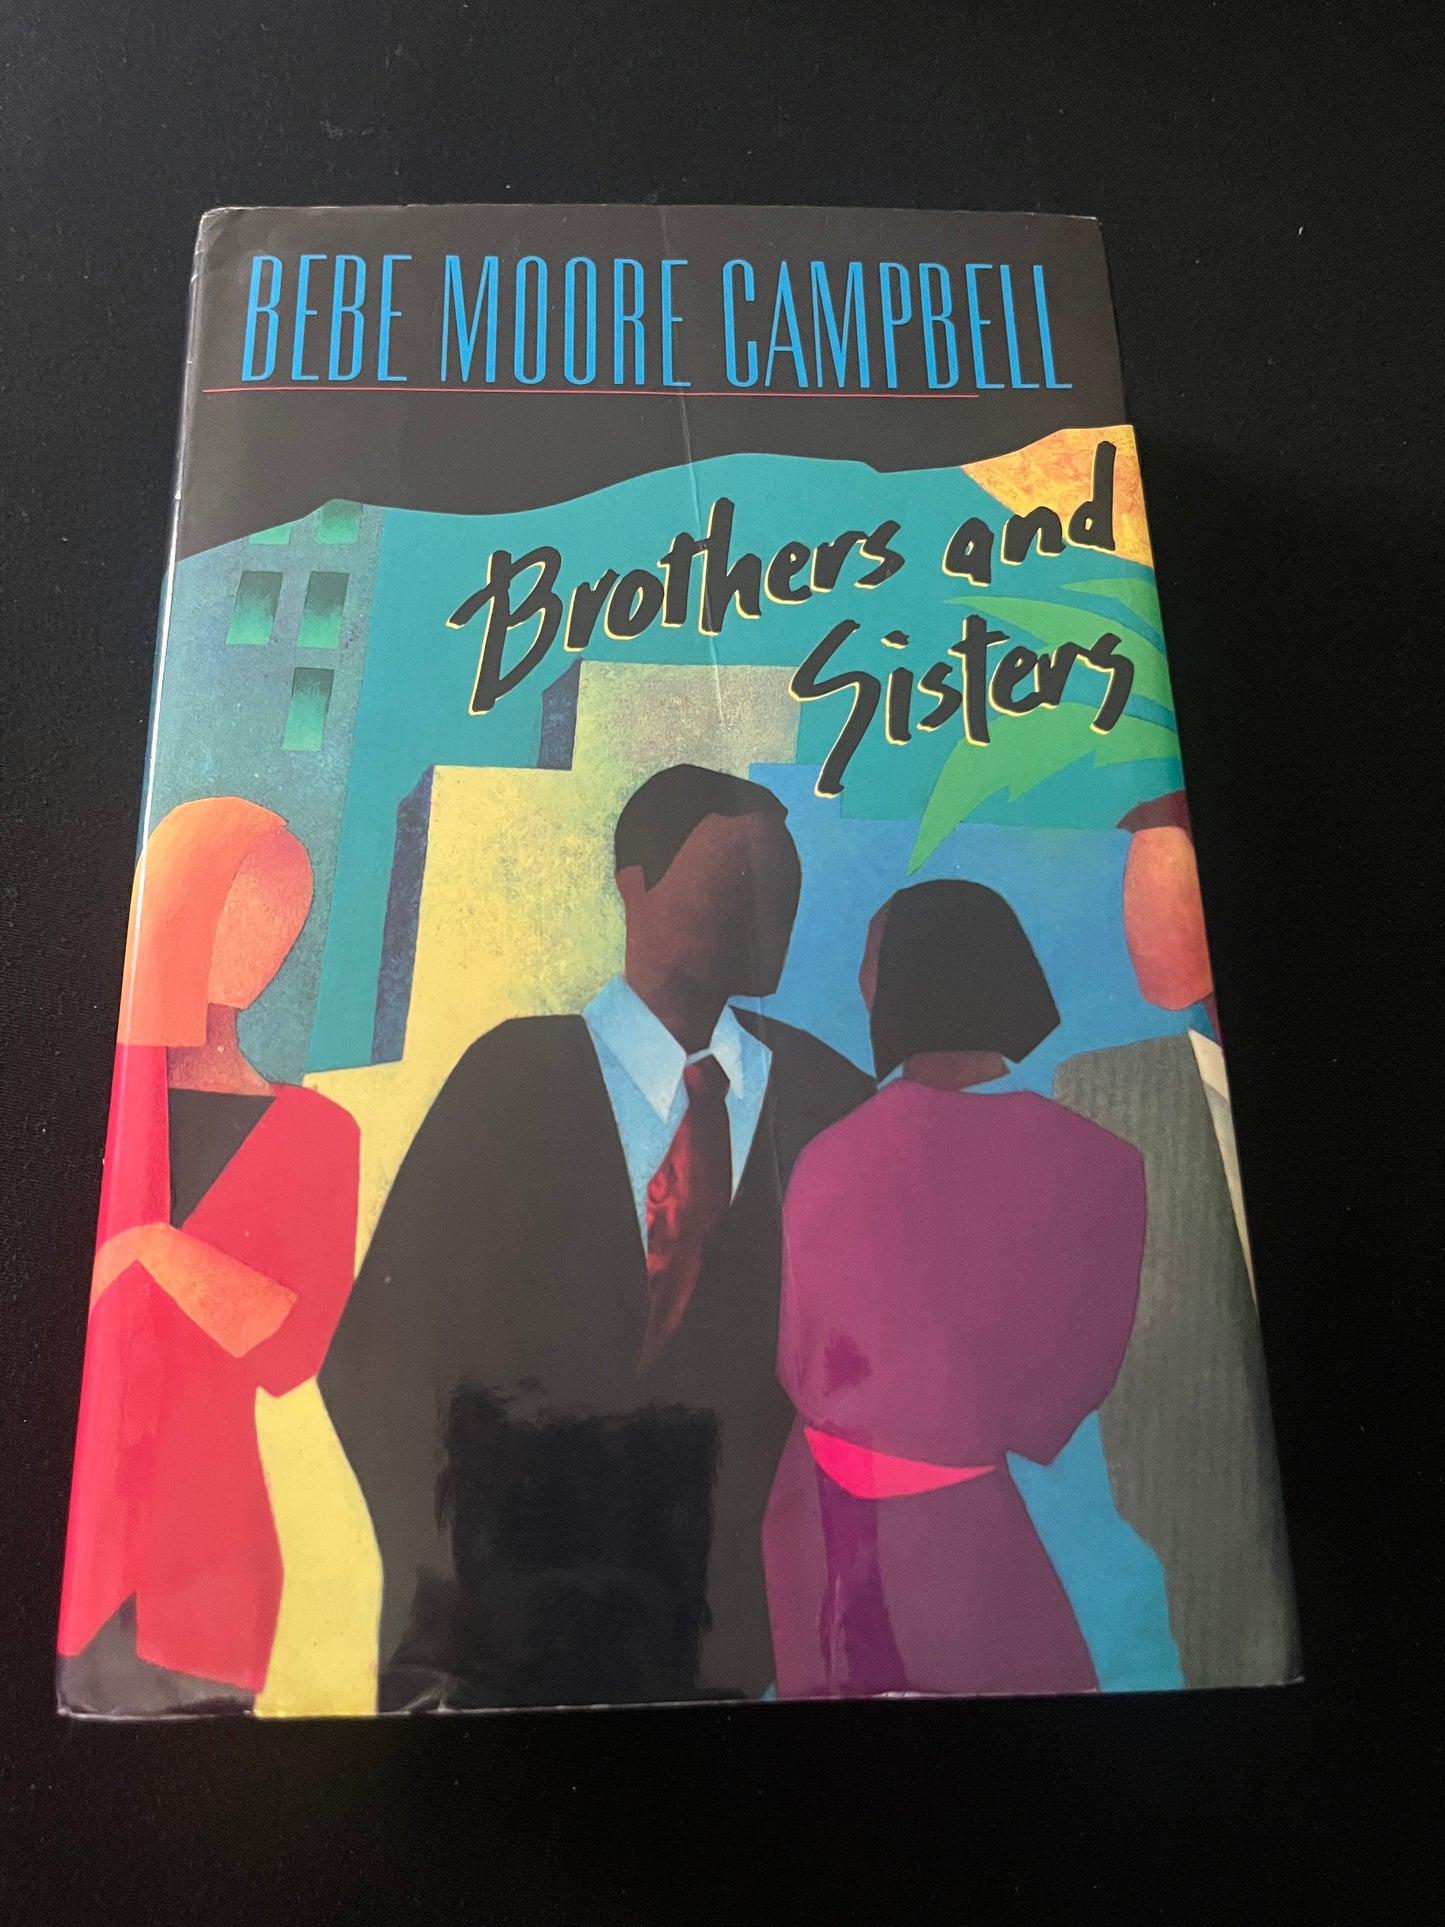 BROTHERS AND SISTERS by Bebe Moore Campbell